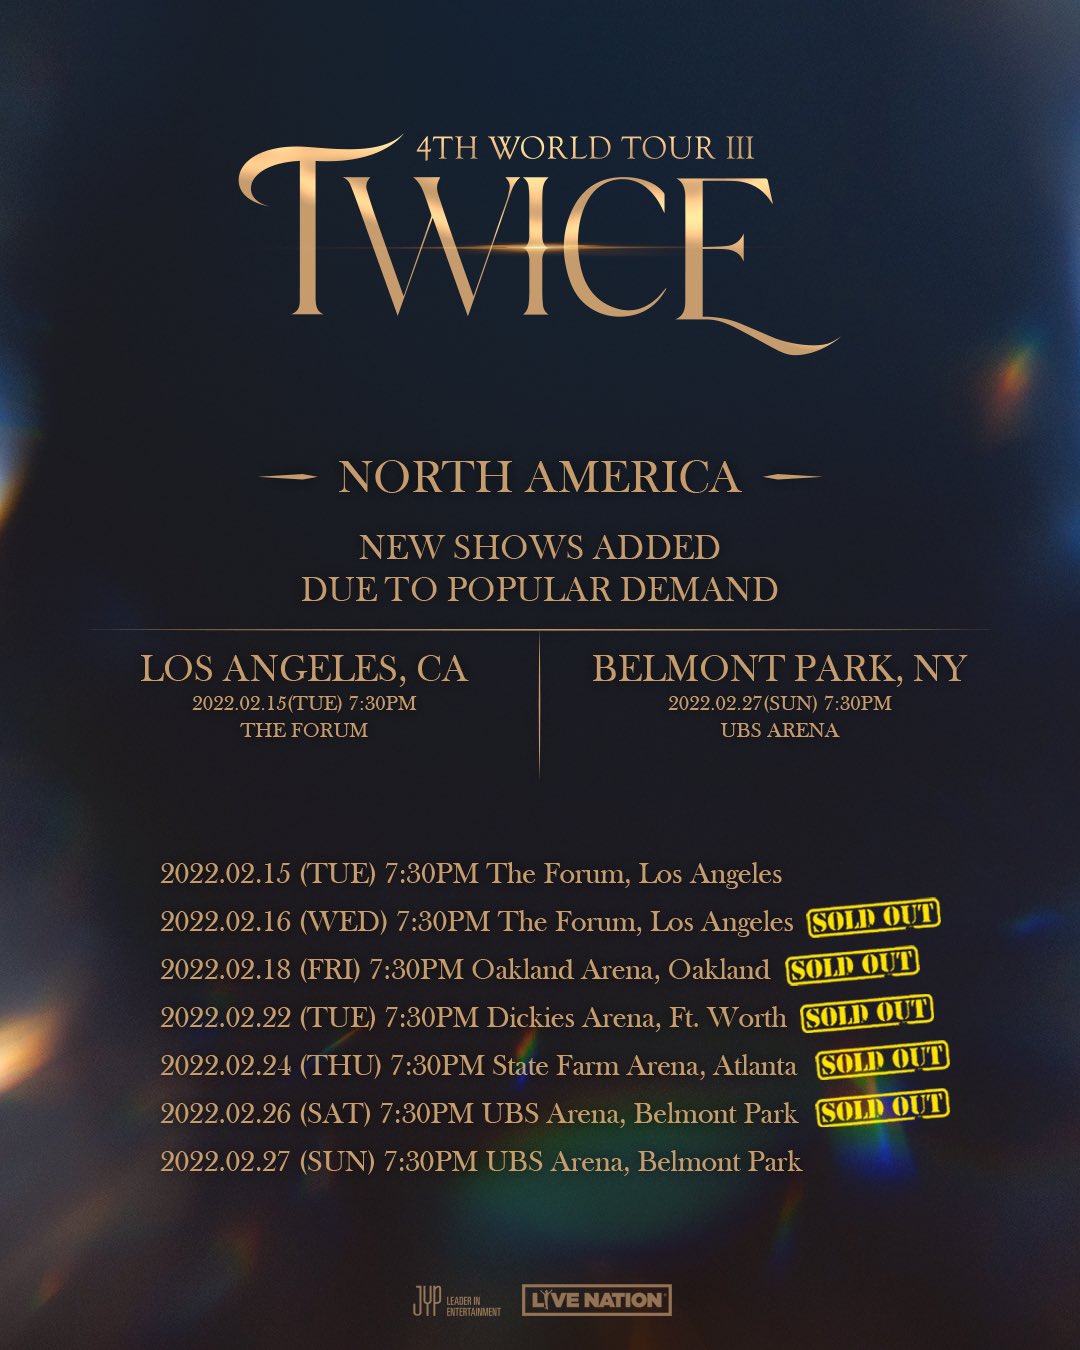 TWICE on Twitter "TWICE 4TH WORLD TOUR ‘Ⅲ’ IN NORTH AMERICA